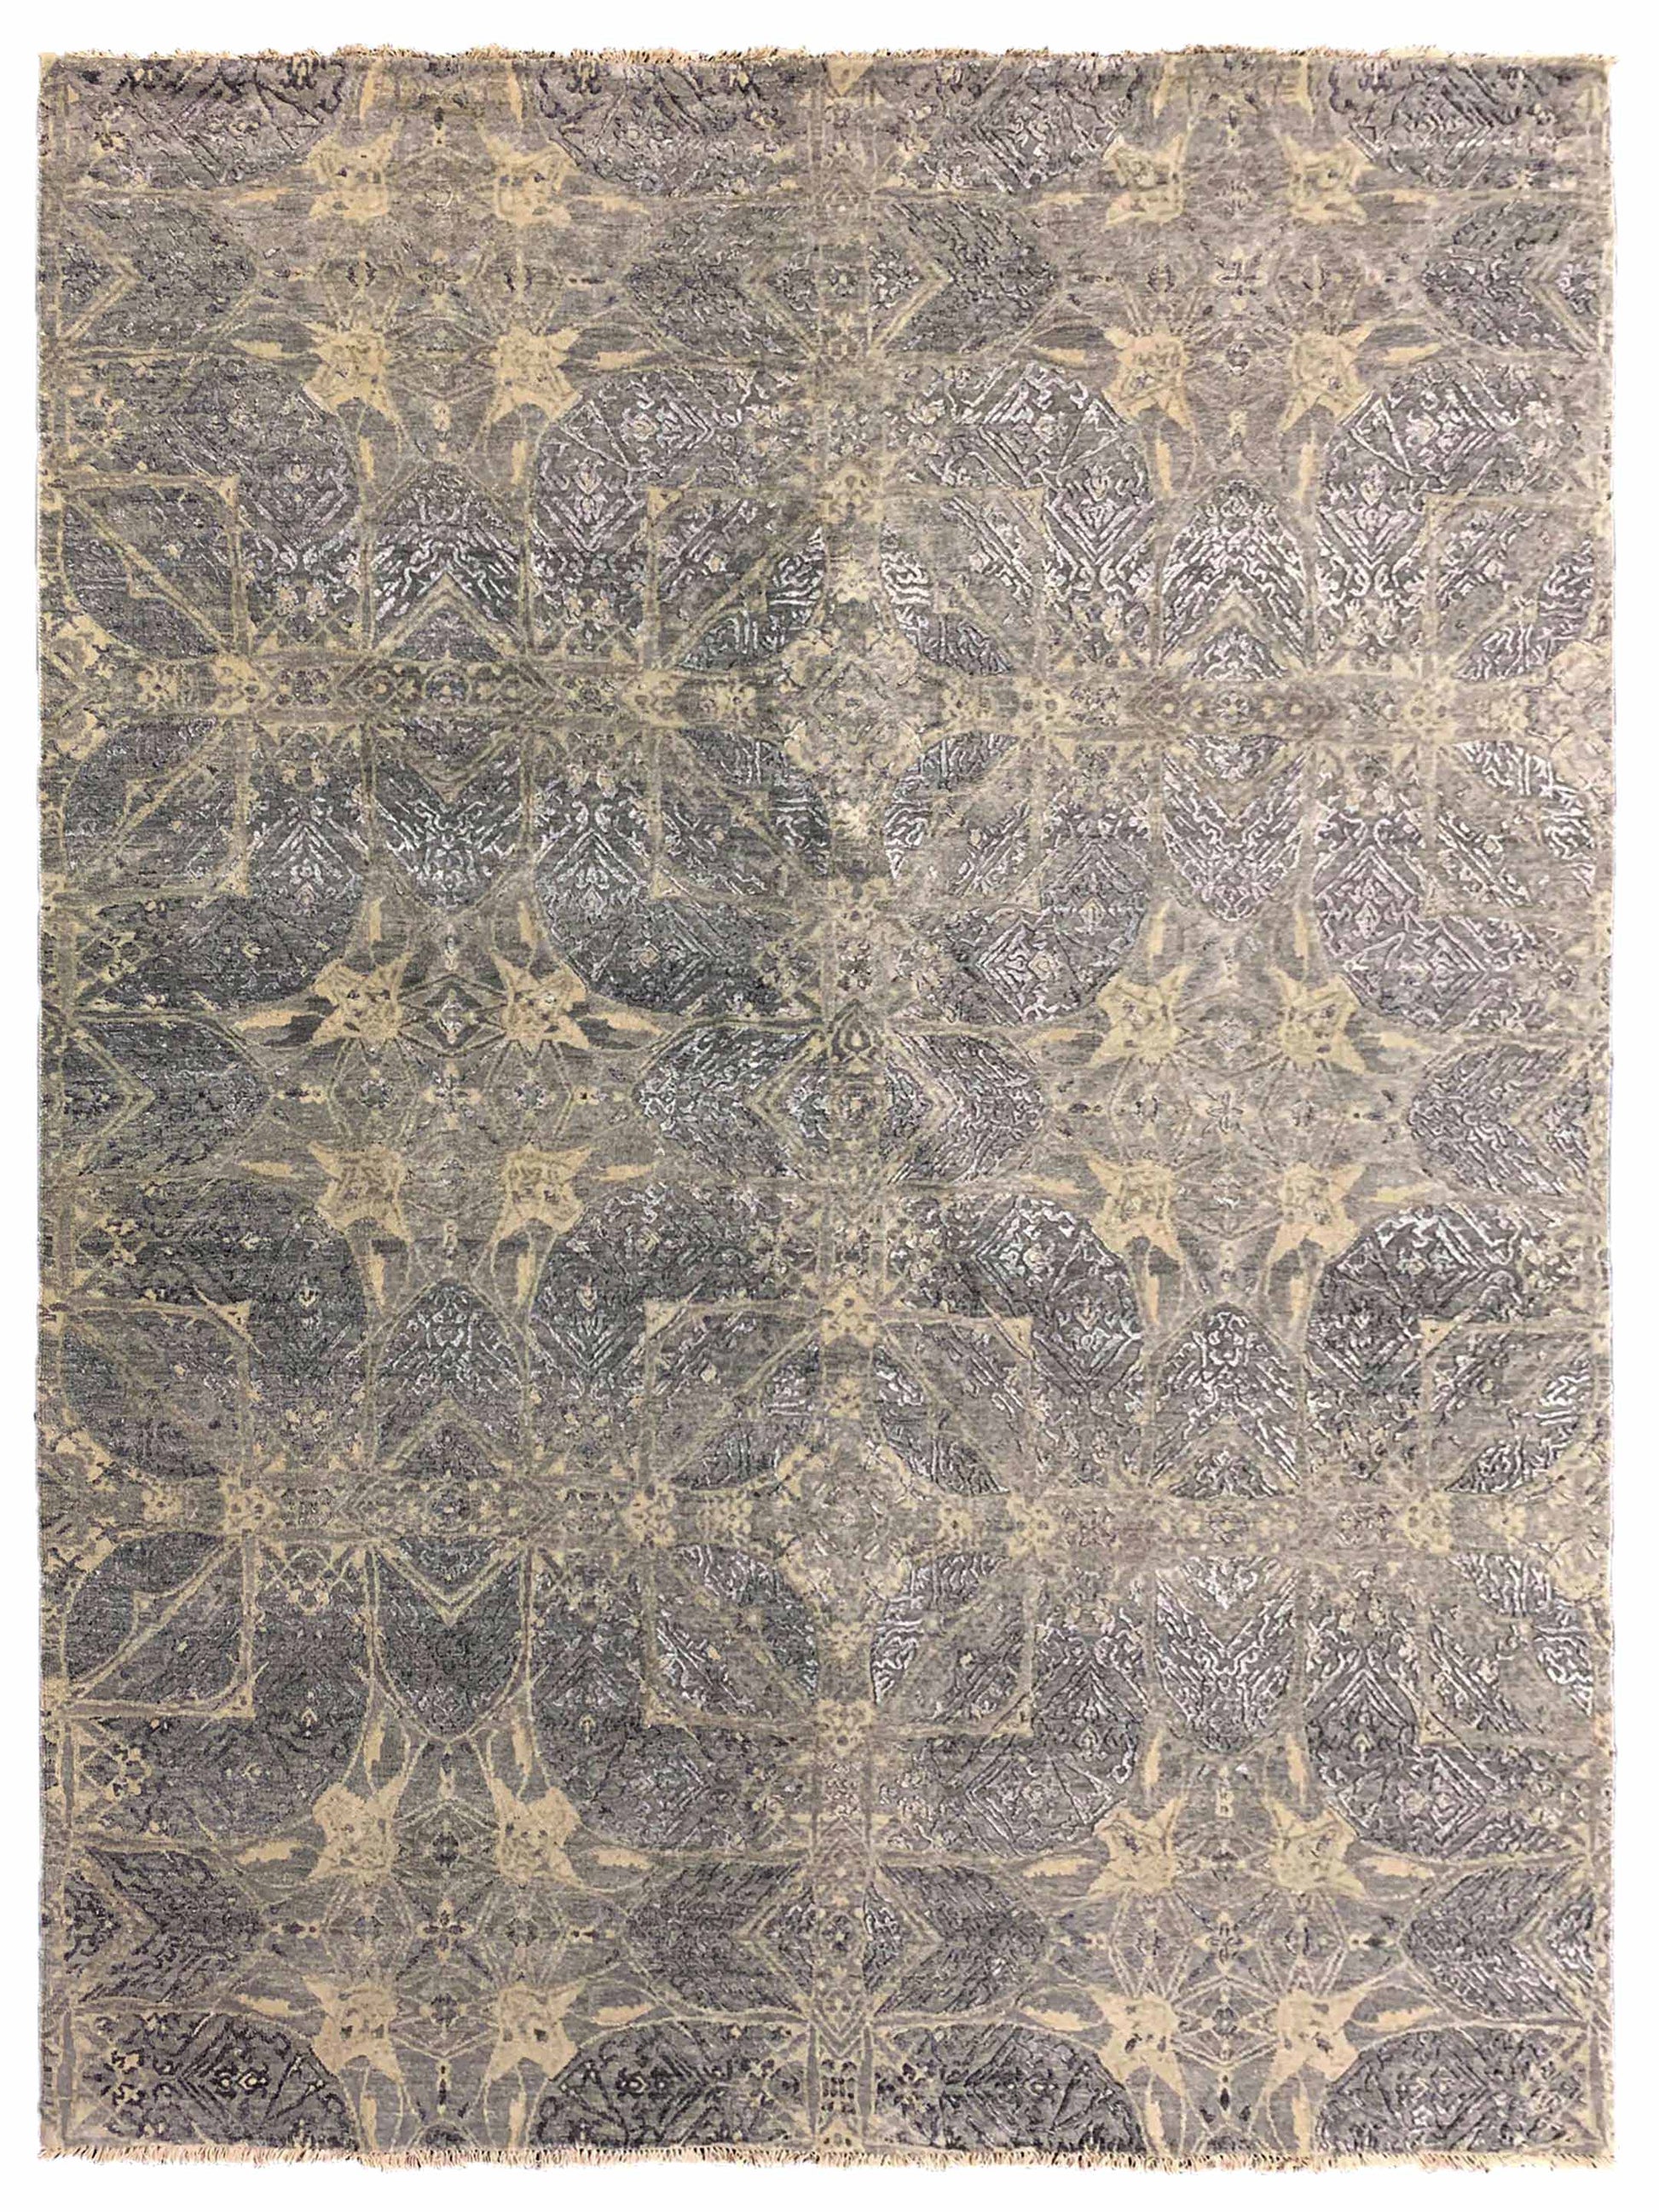 Artisan Adele DL-301 Midnight Transitional Knotted Rug